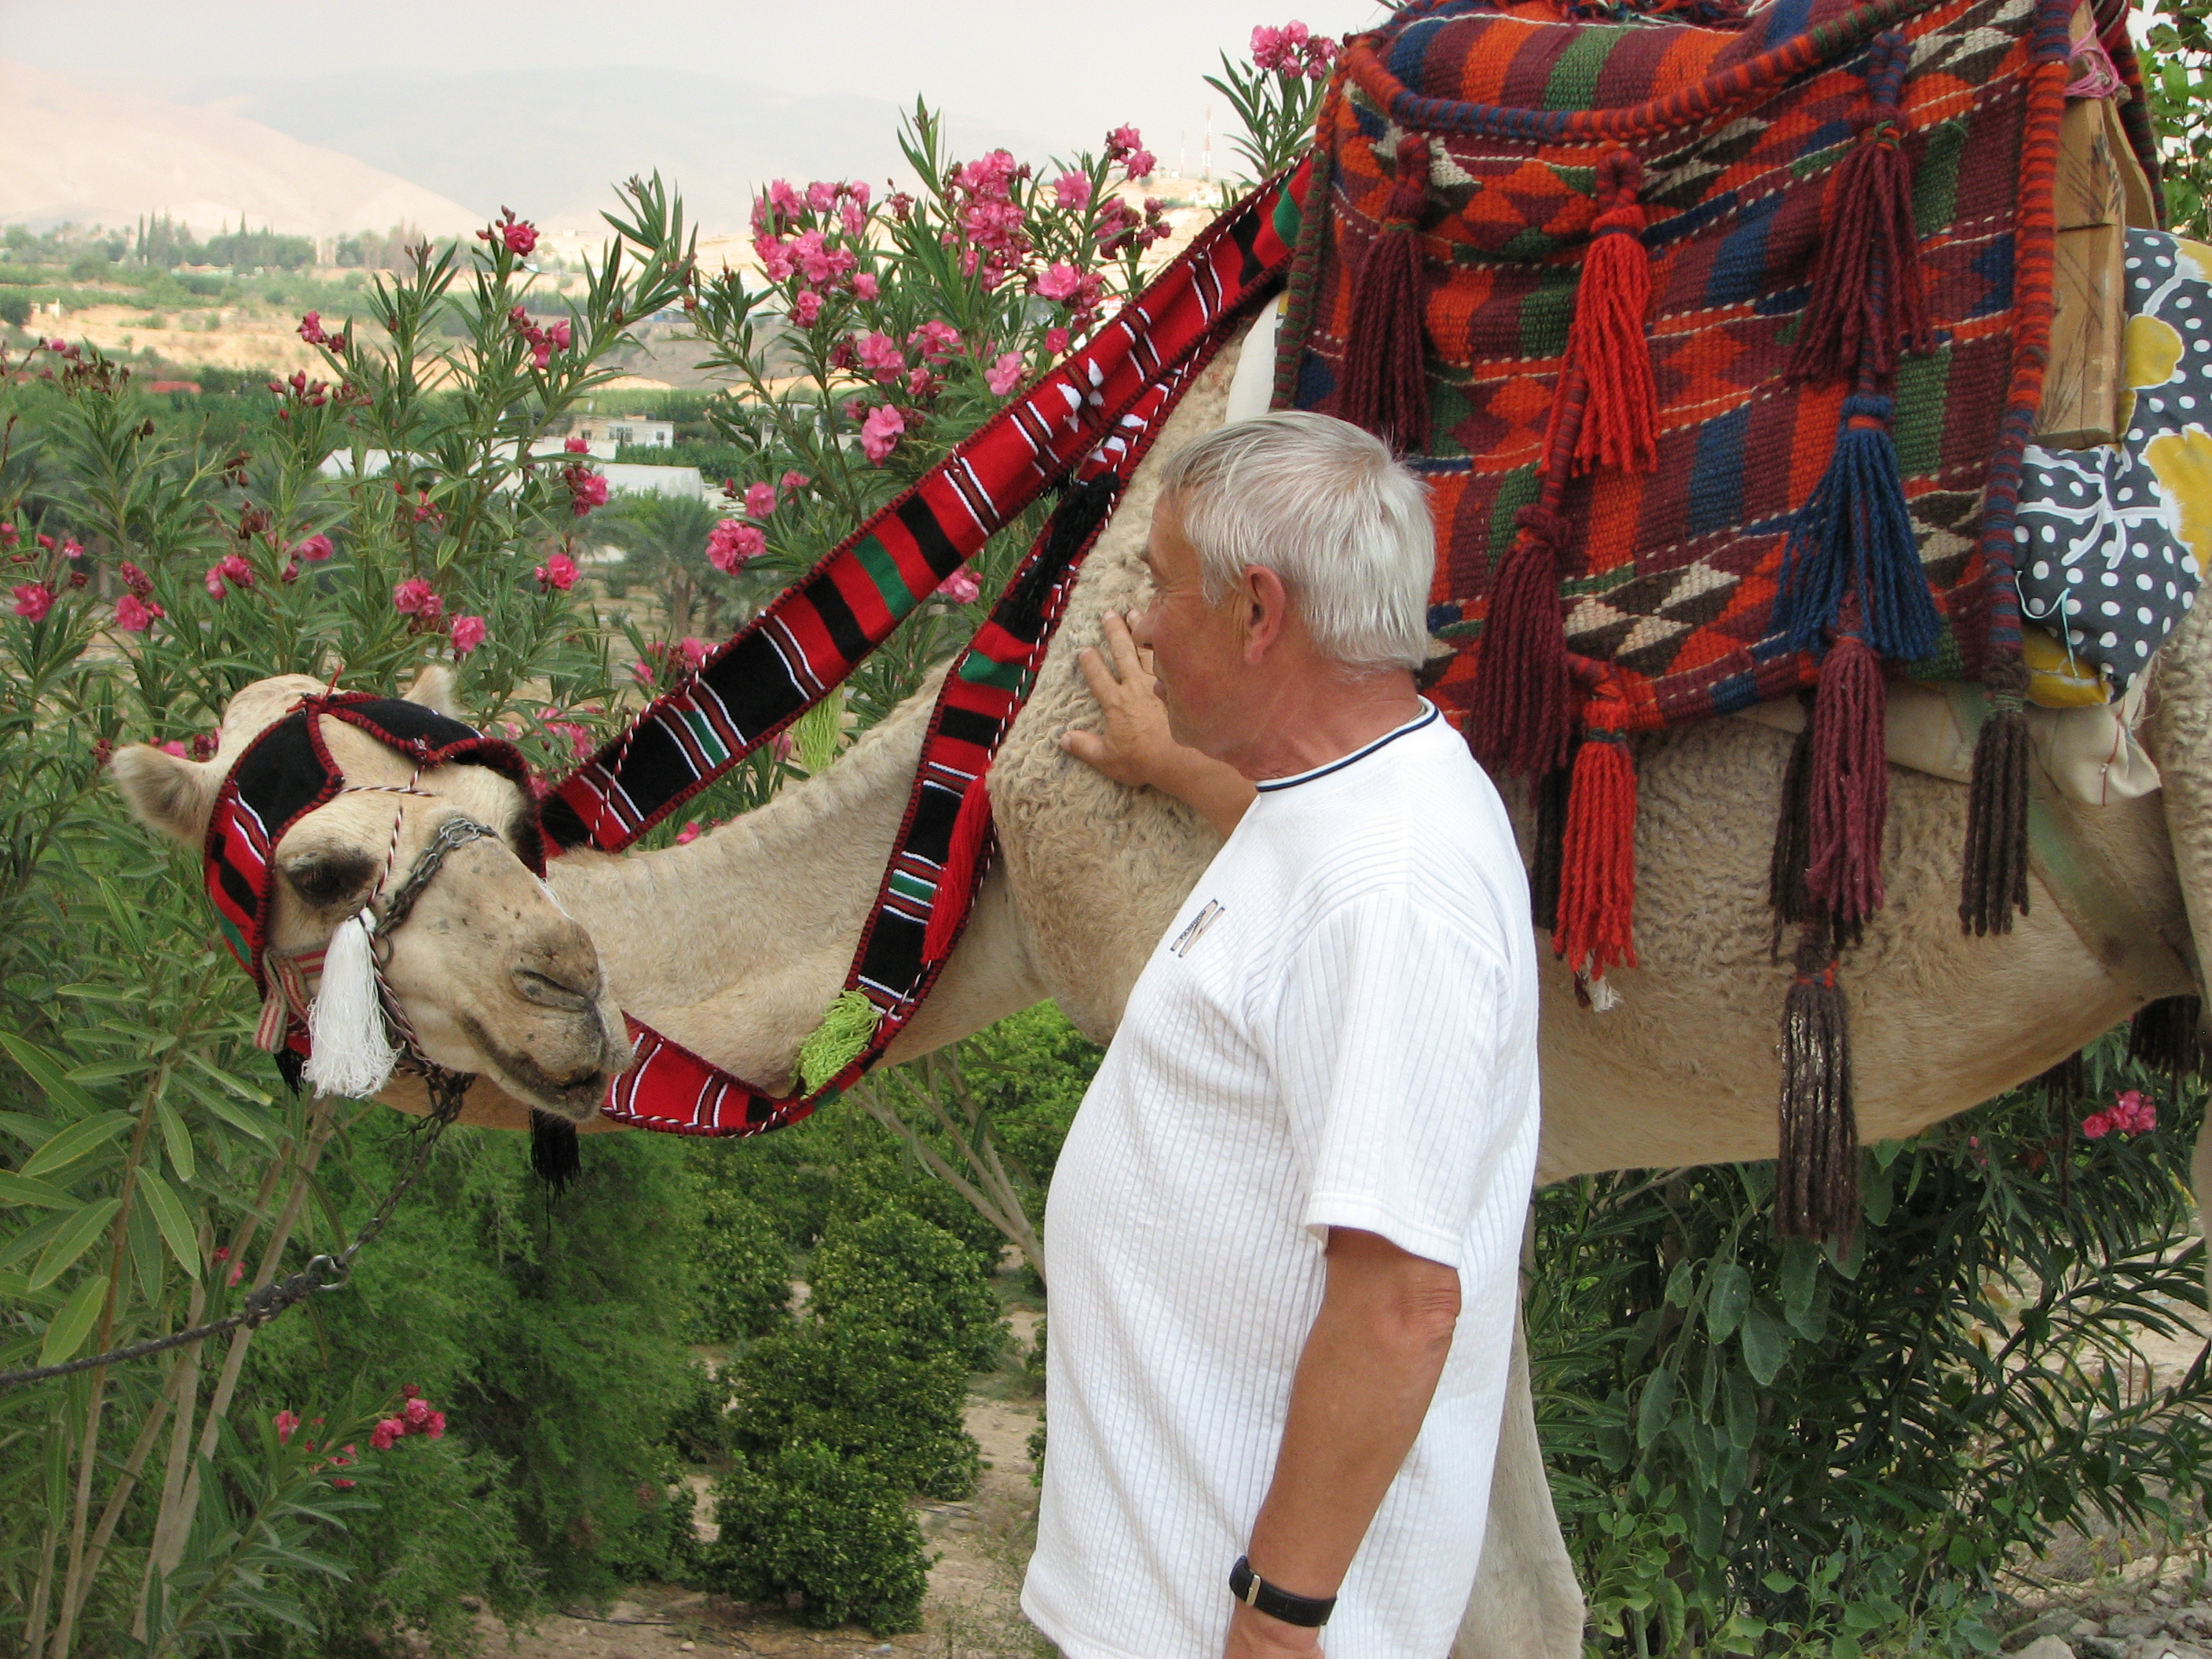 A man with a camel in Jericho, Israel, picture 7.